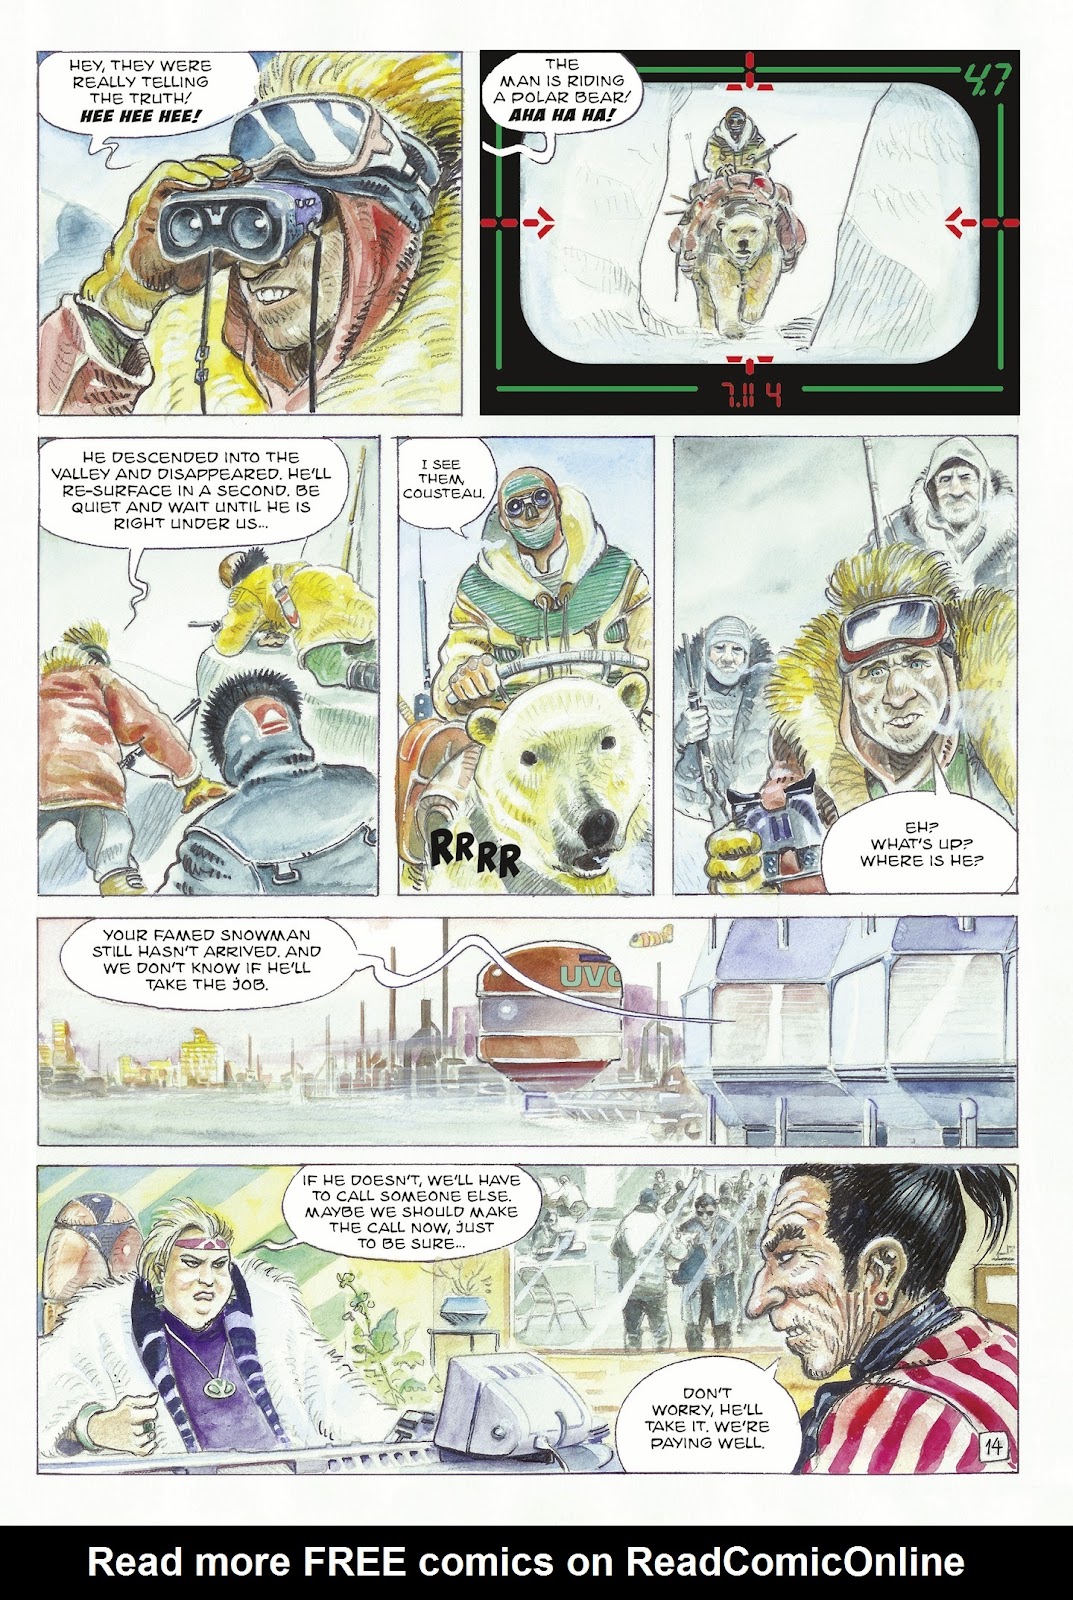 The Man With the Bear issue 1 - Page 16